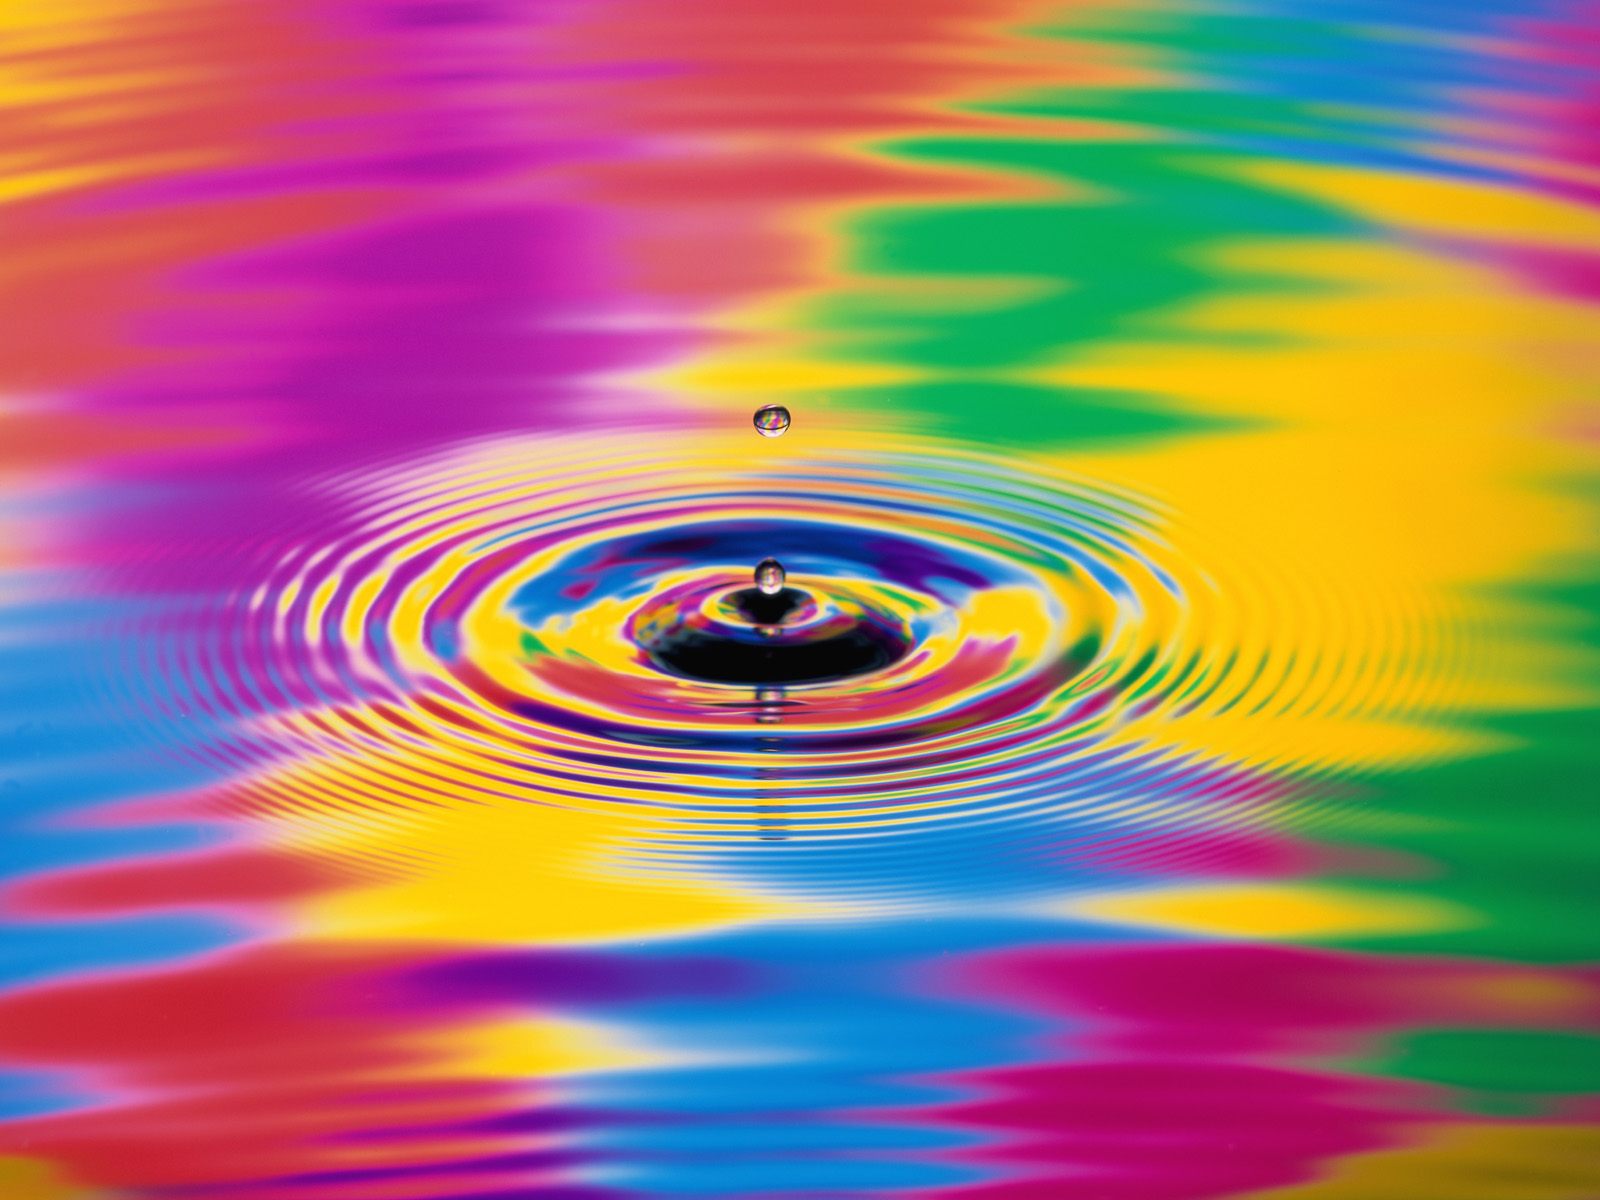 A Splash Of Color - Ripples In Water Rainbow Colors - HD Wallpaper 